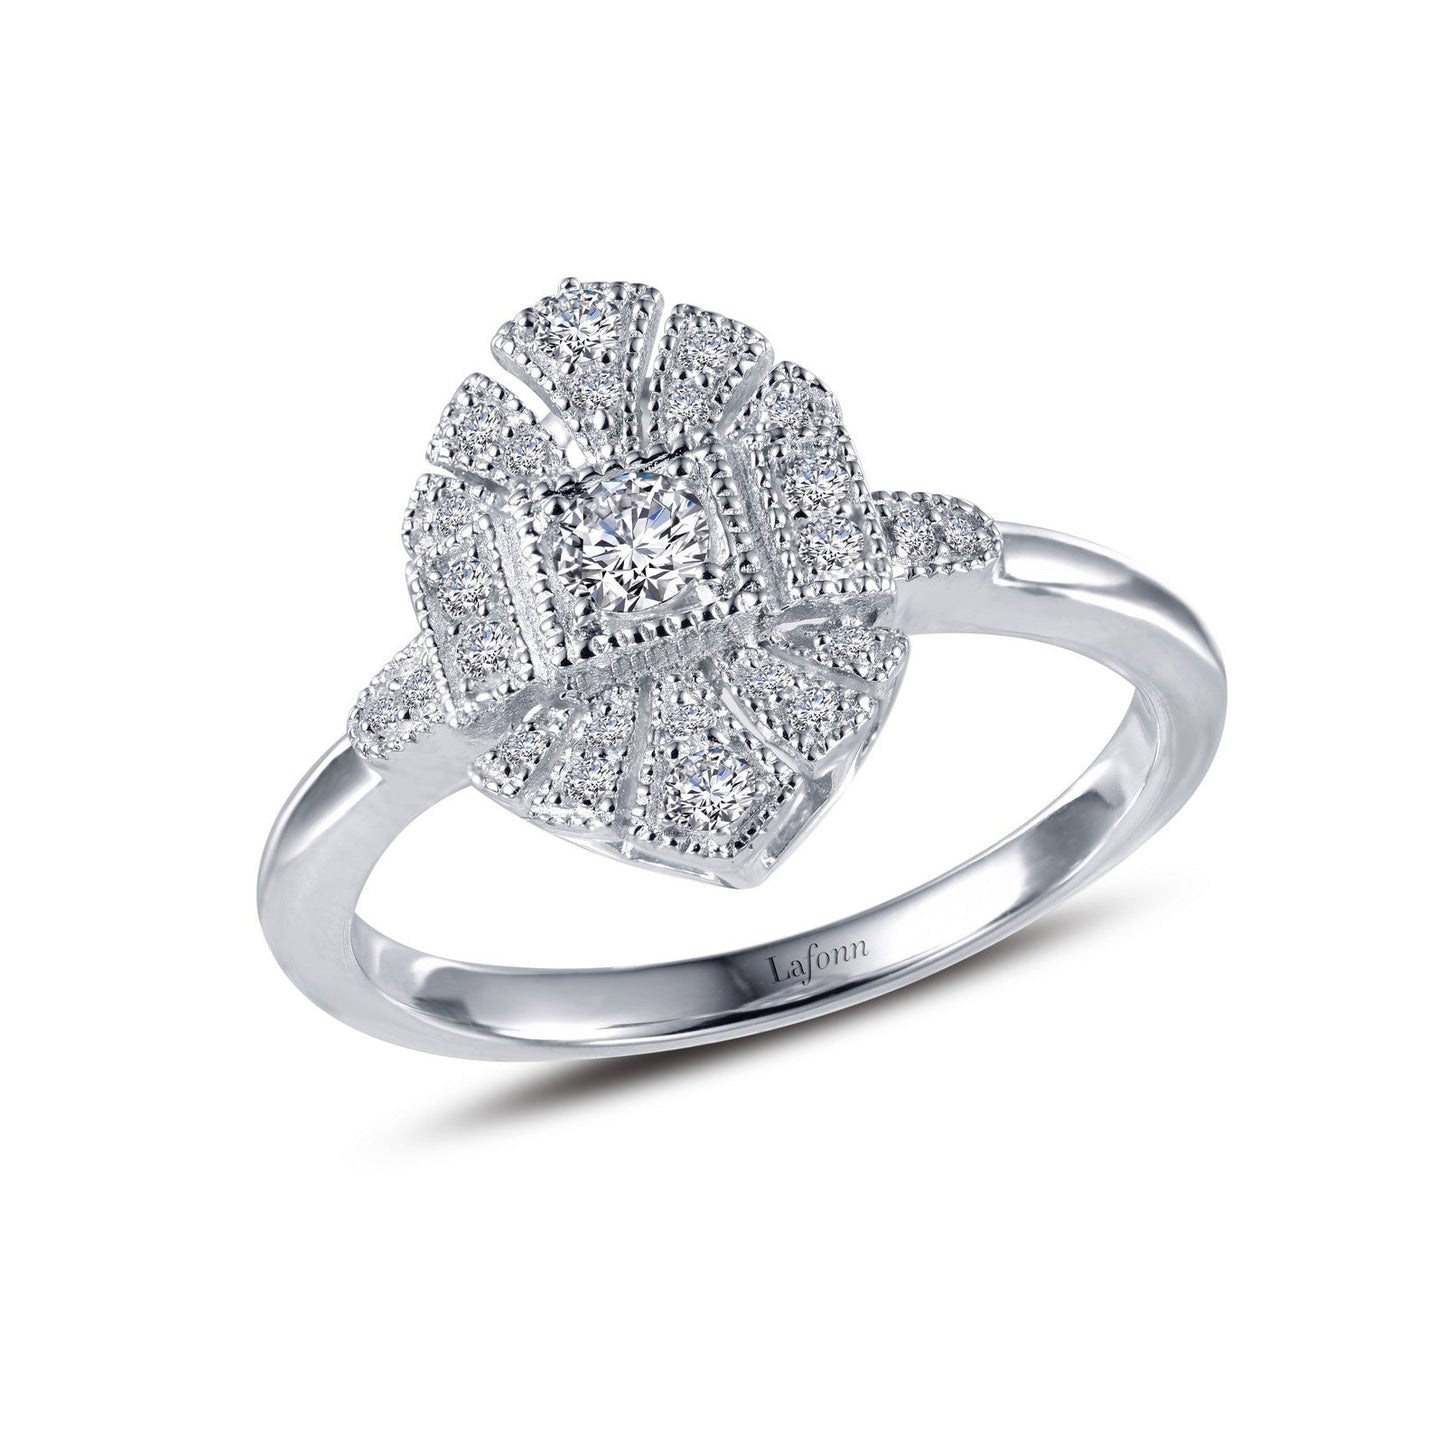 Load image into Gallery viewer, Lafonn Vintage Inspired Engagement Ring 25 Stone Count R0285CLP06
